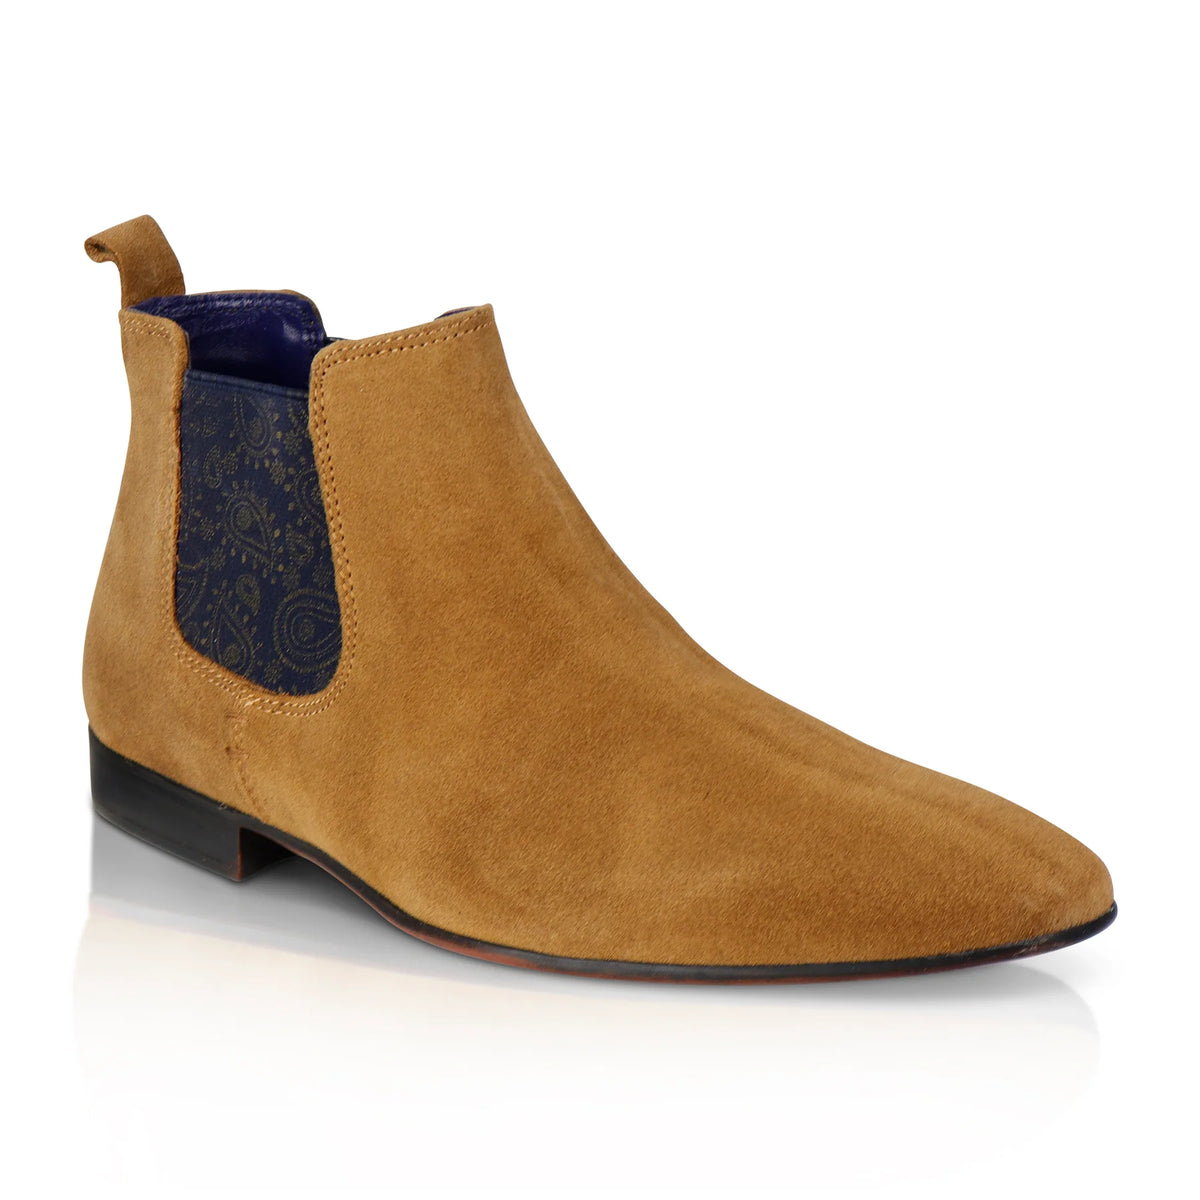 Carnaby Tan Suede Chelsea boots